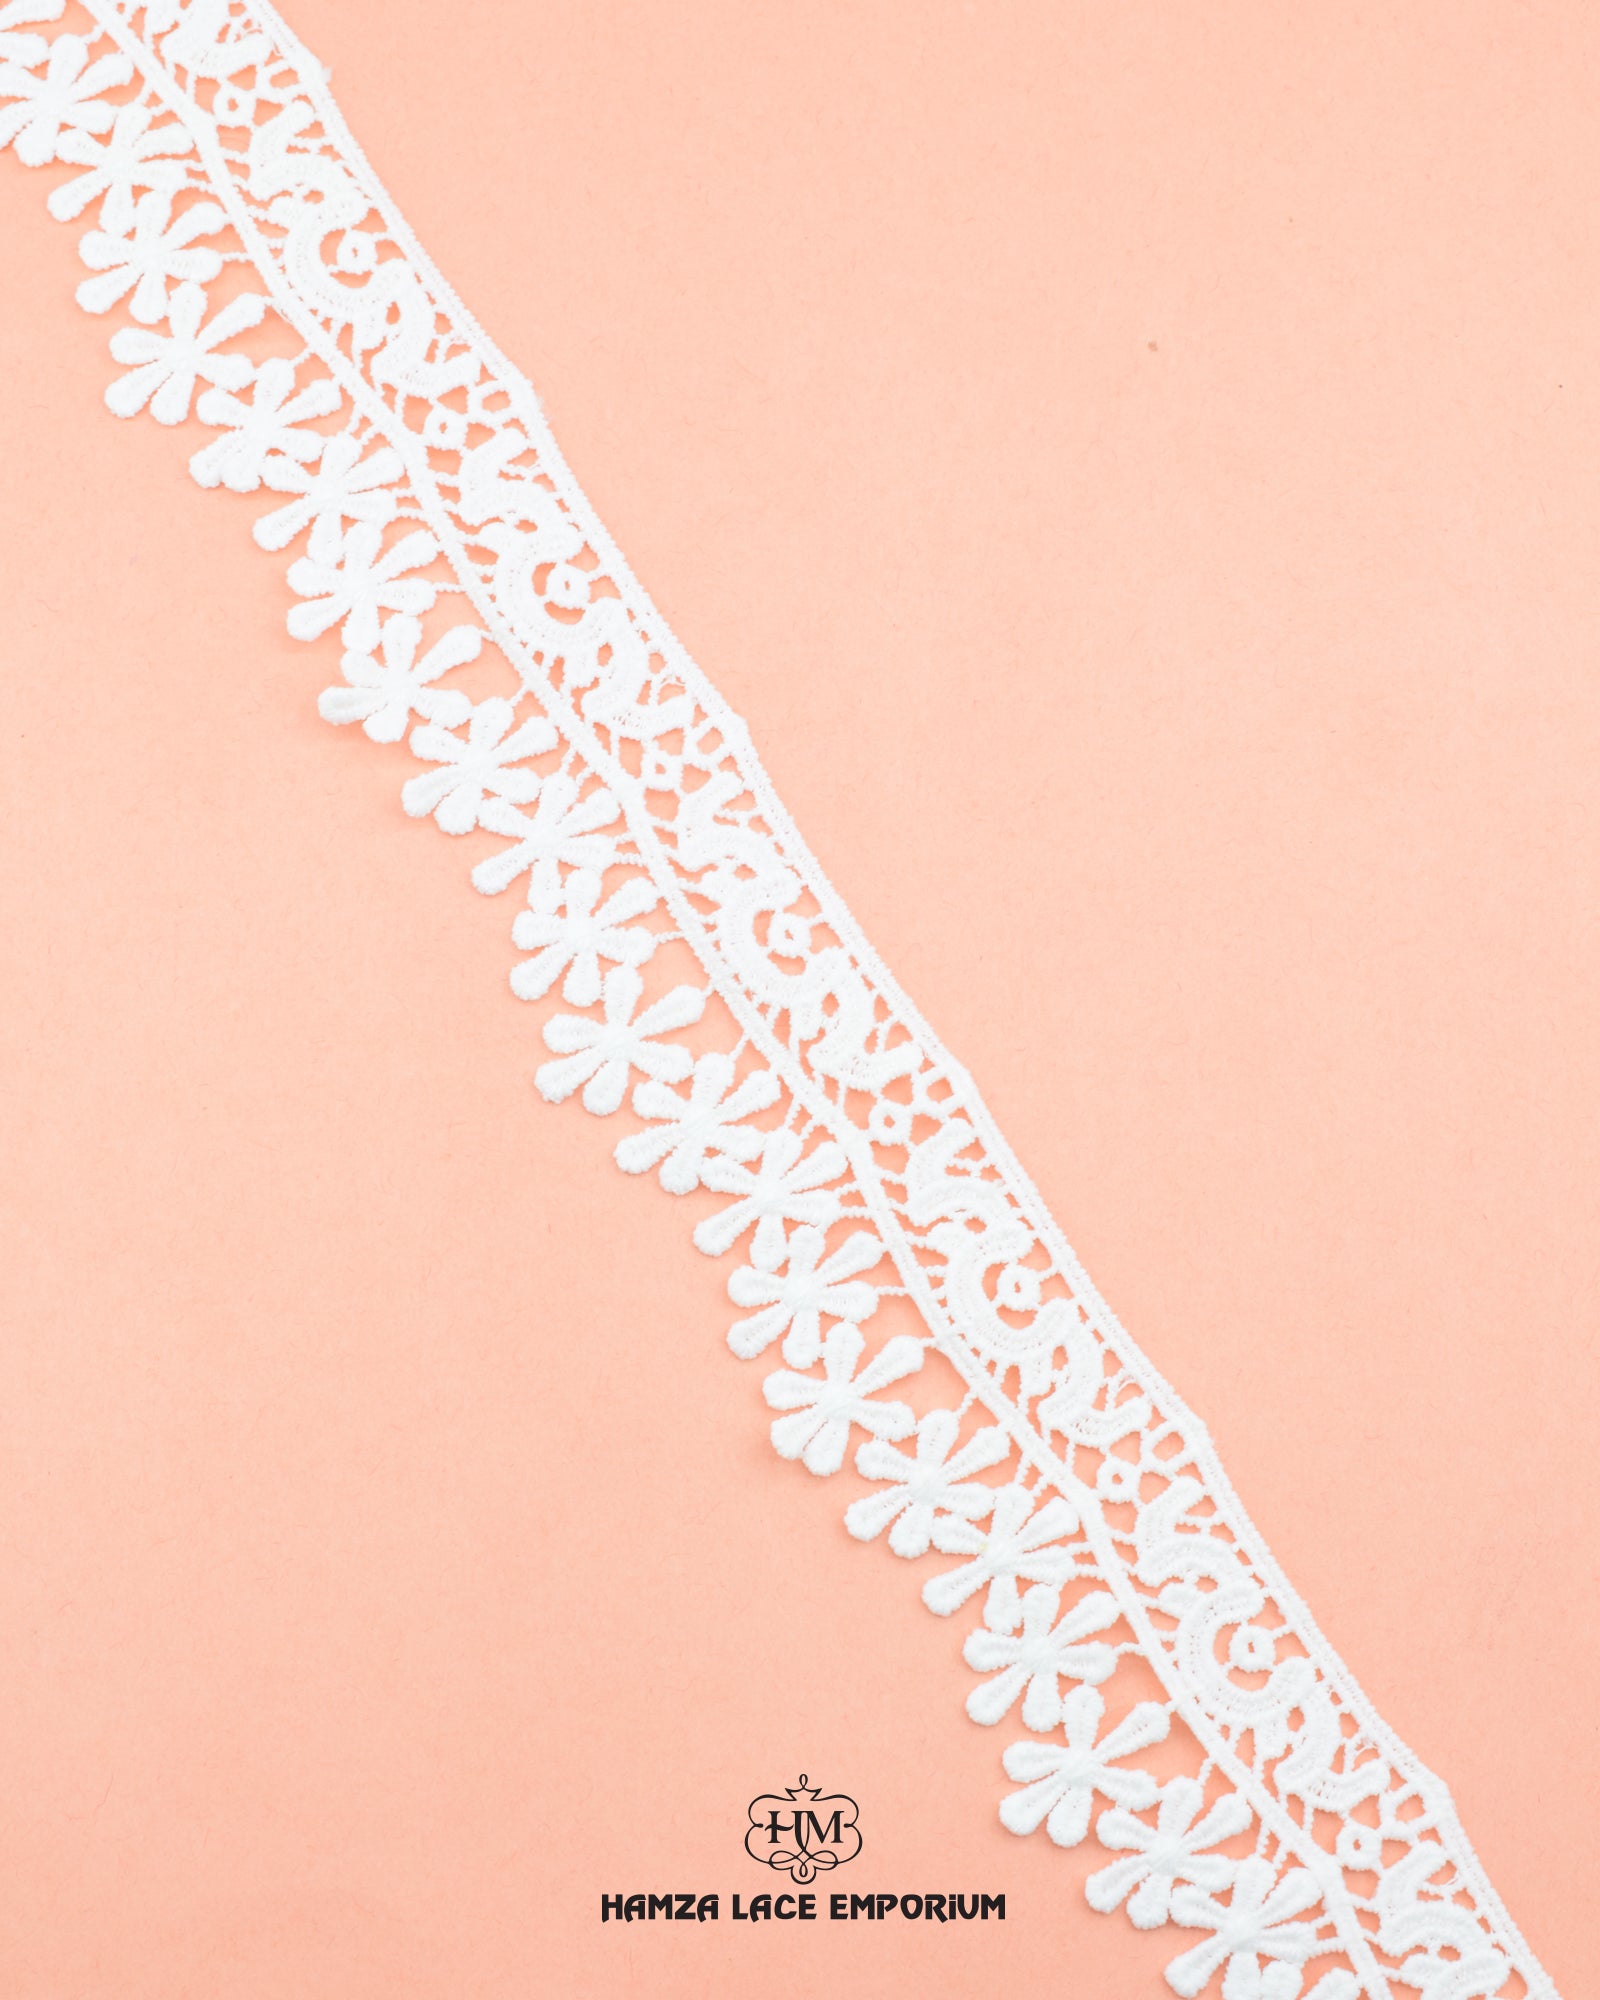 'Edging Flower Lace 23325' with the 'Hamza Lace' sign